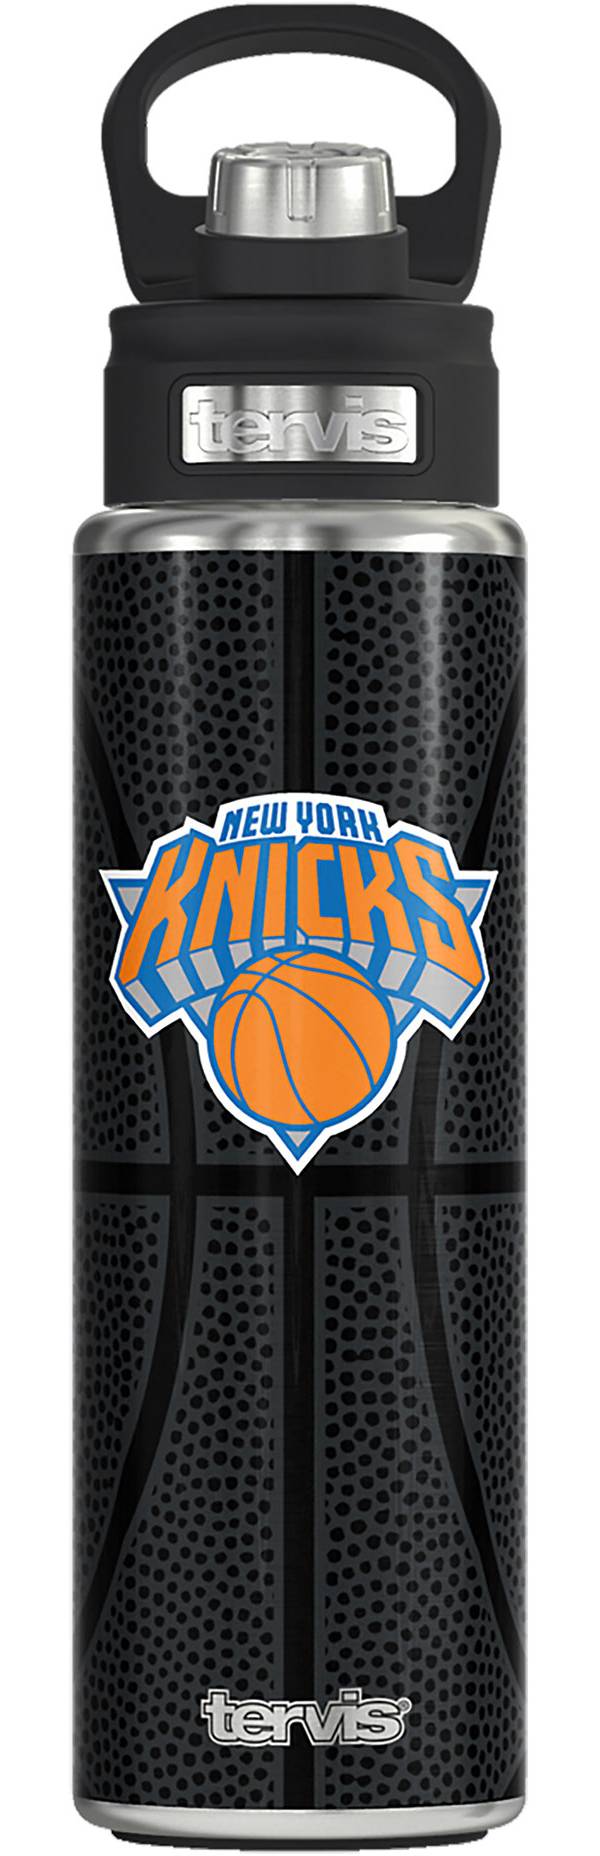 Tervis New York Knicks 24oz. Stainless Steel Water Bottle product image